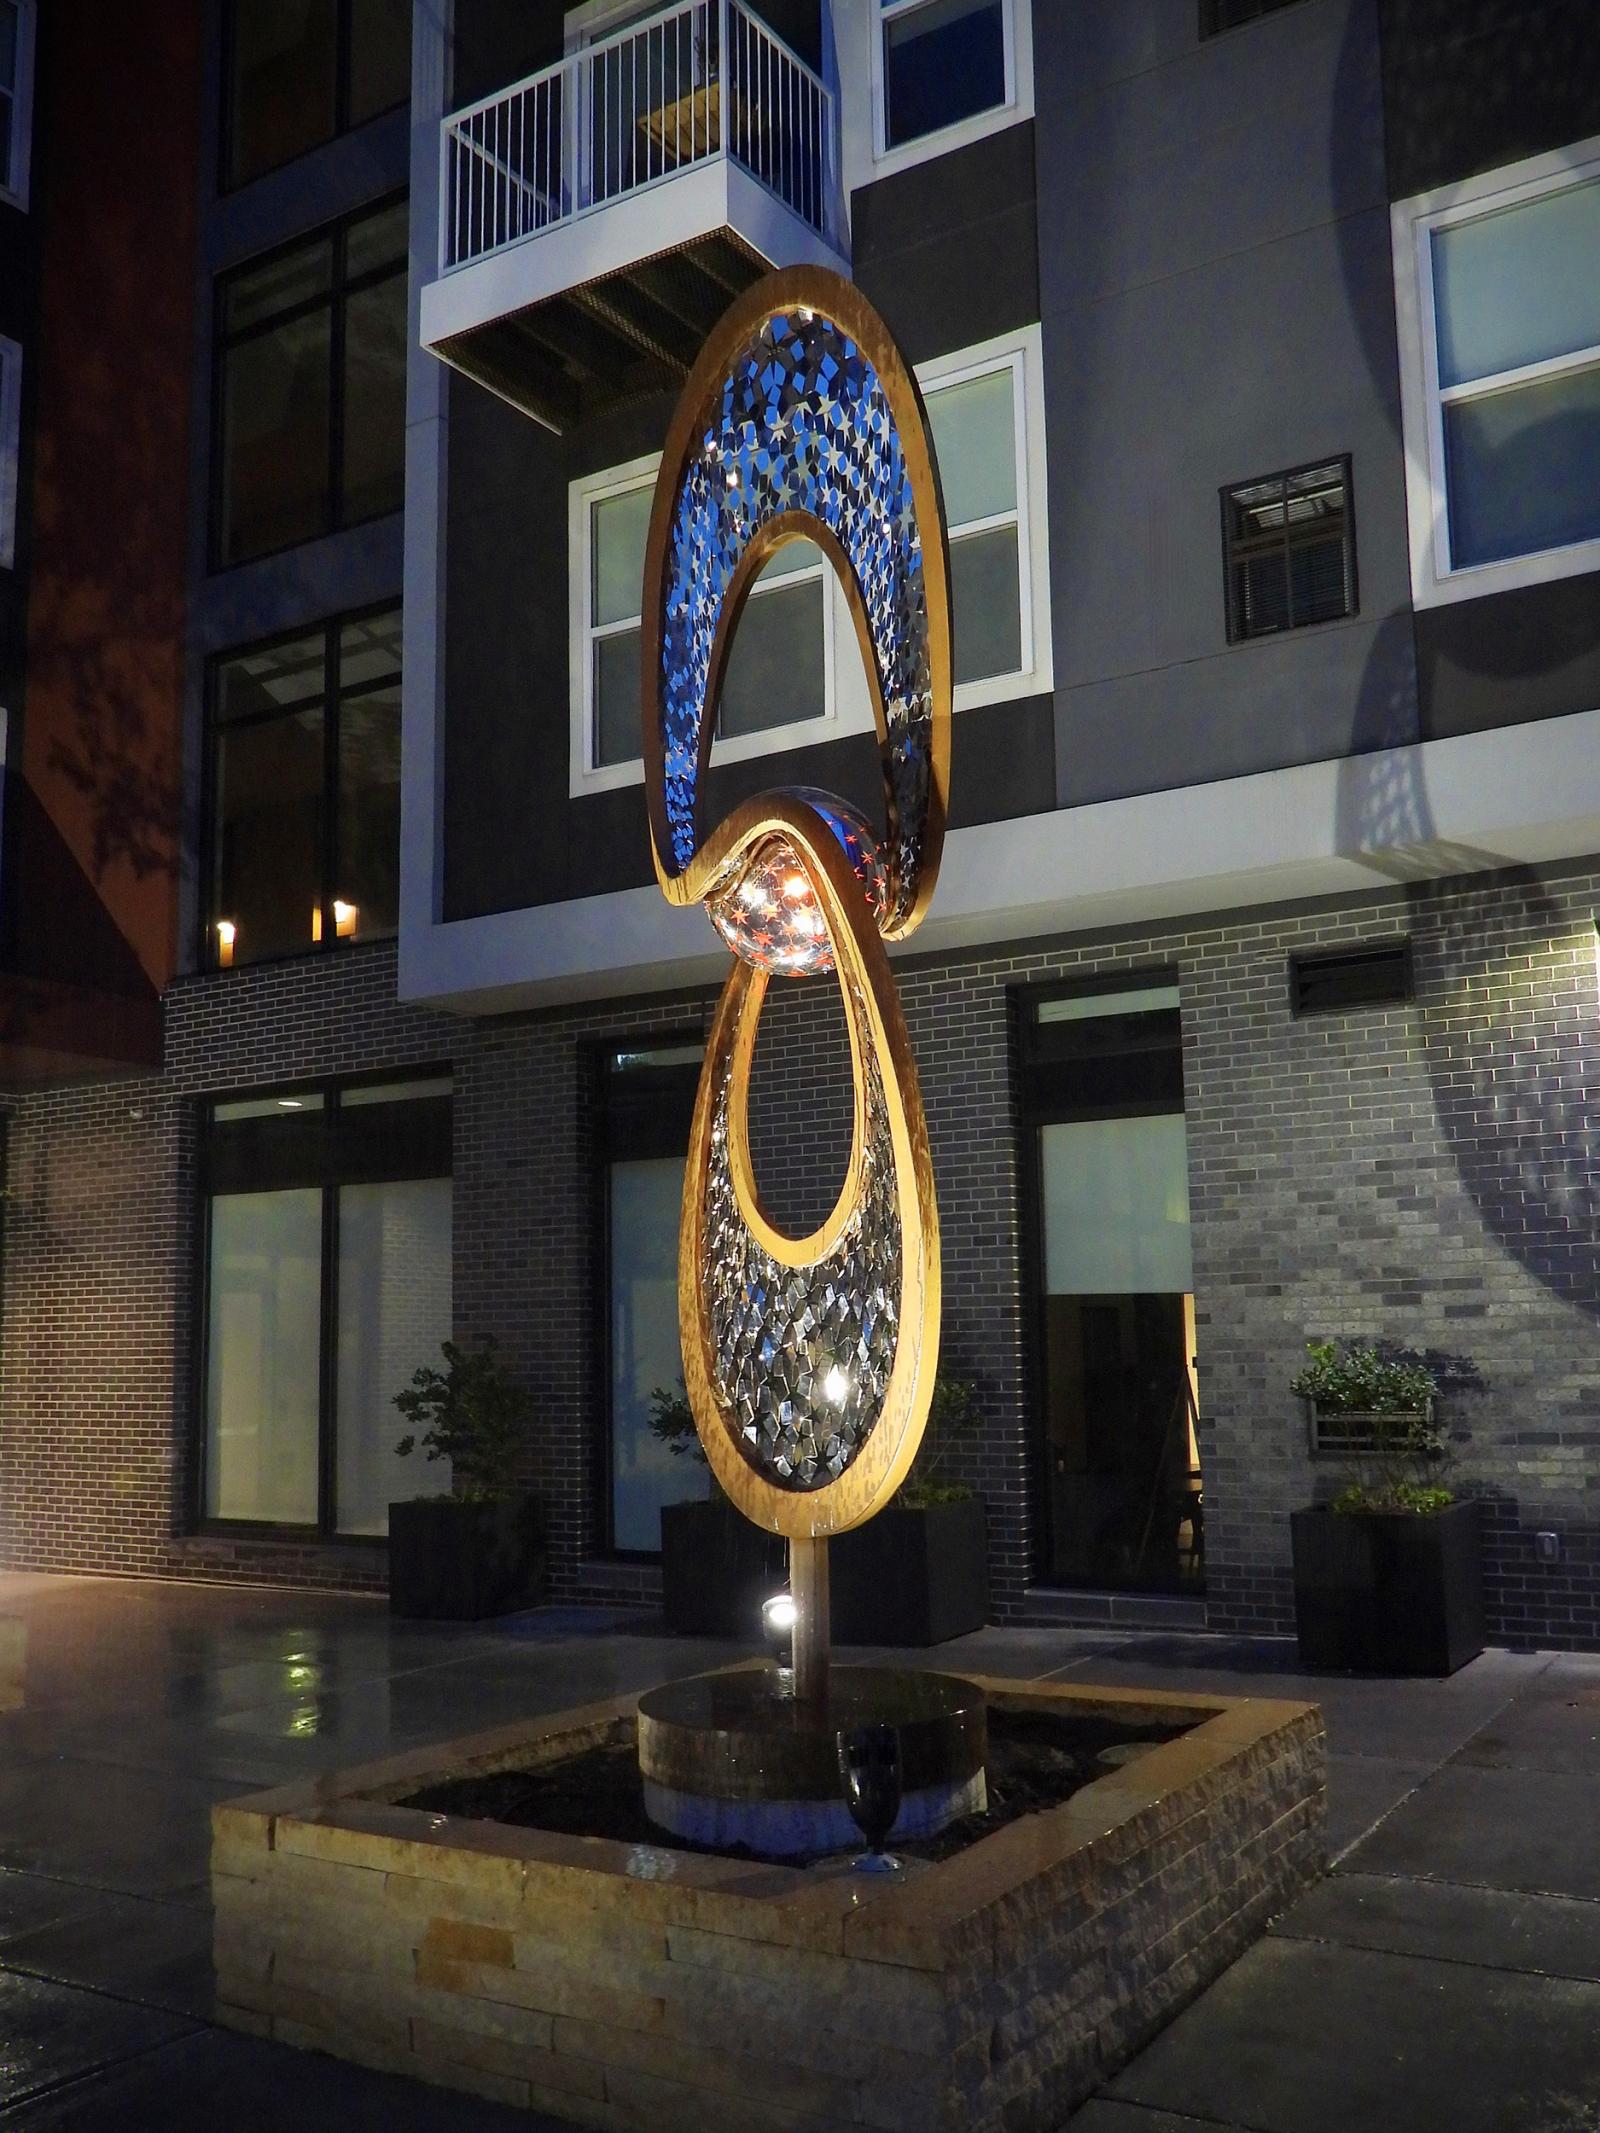 Commissioned by Art Partners for STELLA apartments. I designed and built an unique eye-catching waypoint for the new development to go with  the "stellar" themed artwork throughout the inside of the building. From the front vantage point there is a stylized "S" in the sculpture, a nod towards the "S" in Stella.